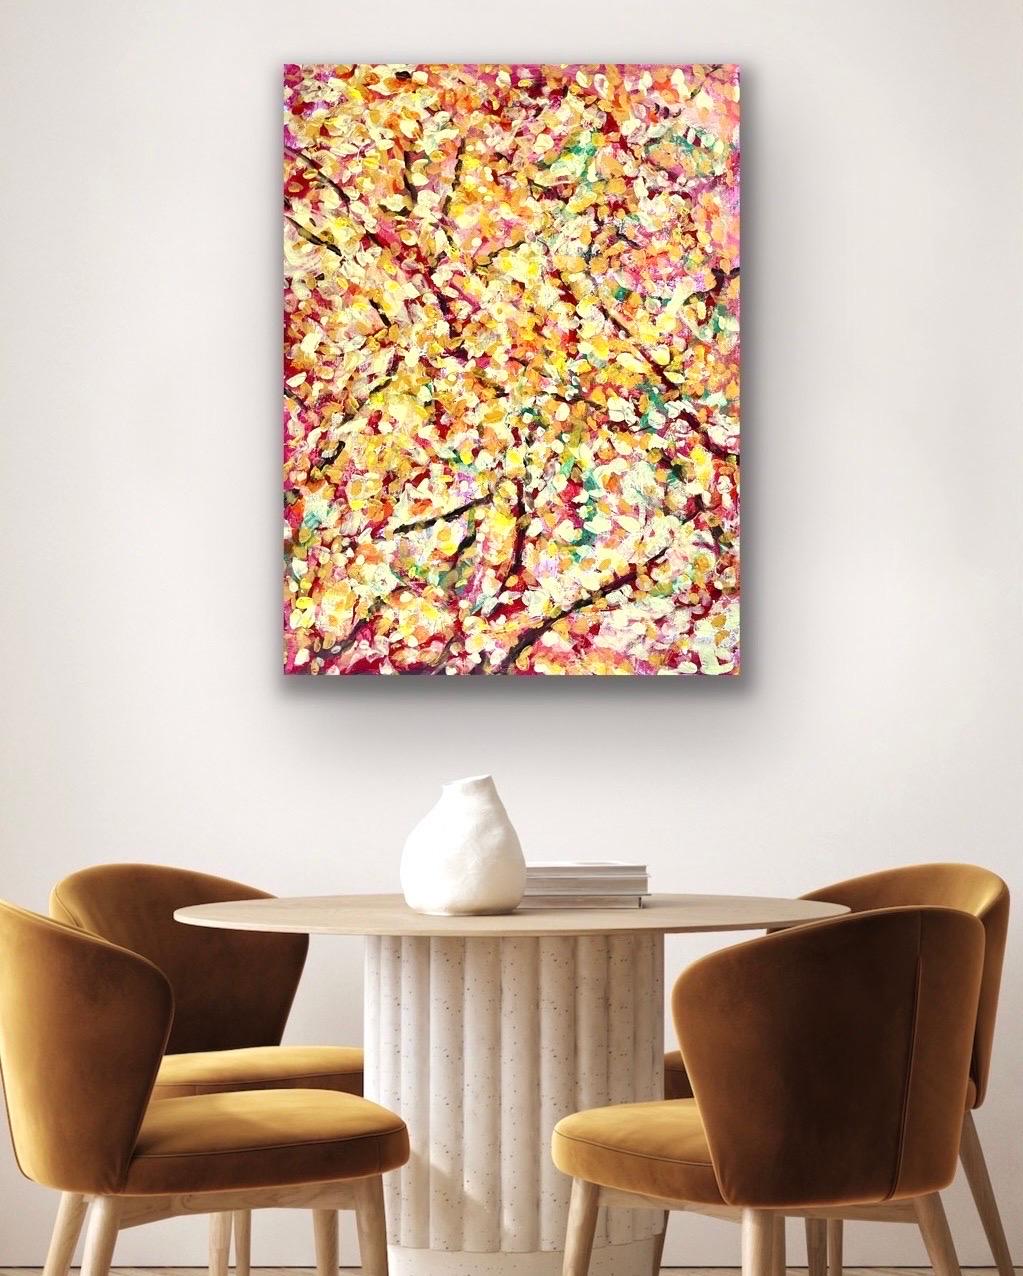 Large, unframed signed abstract painting depicting colorful fall leaves.
Signed by well listed American painter Arlene Carr.  The medium is acrylic on canvas.  Signature at lower right and note this work of art can be hung vertically or horizontally.